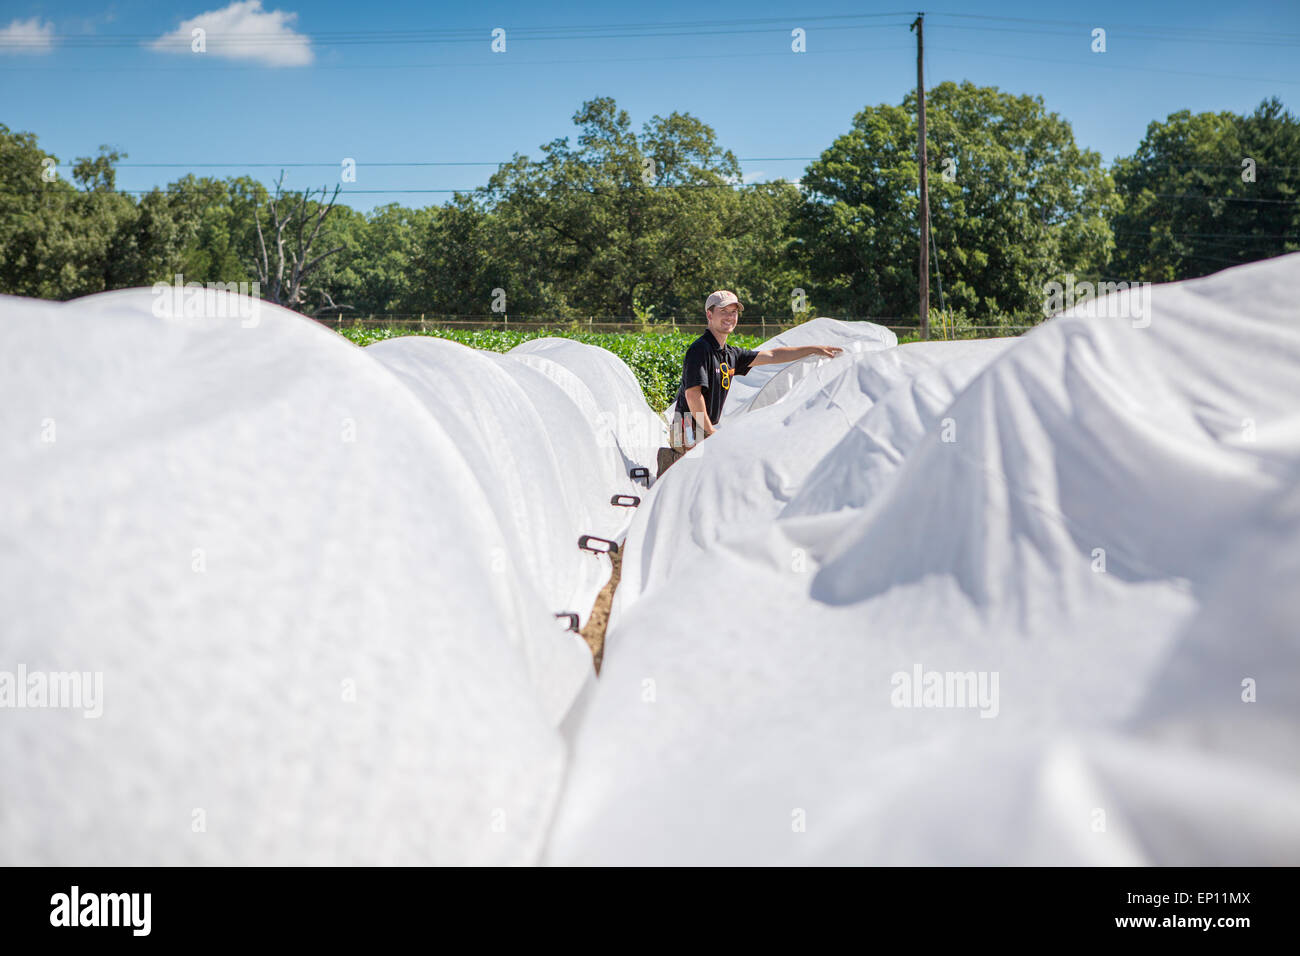 Young man installing row covers over crop. Stock Photo